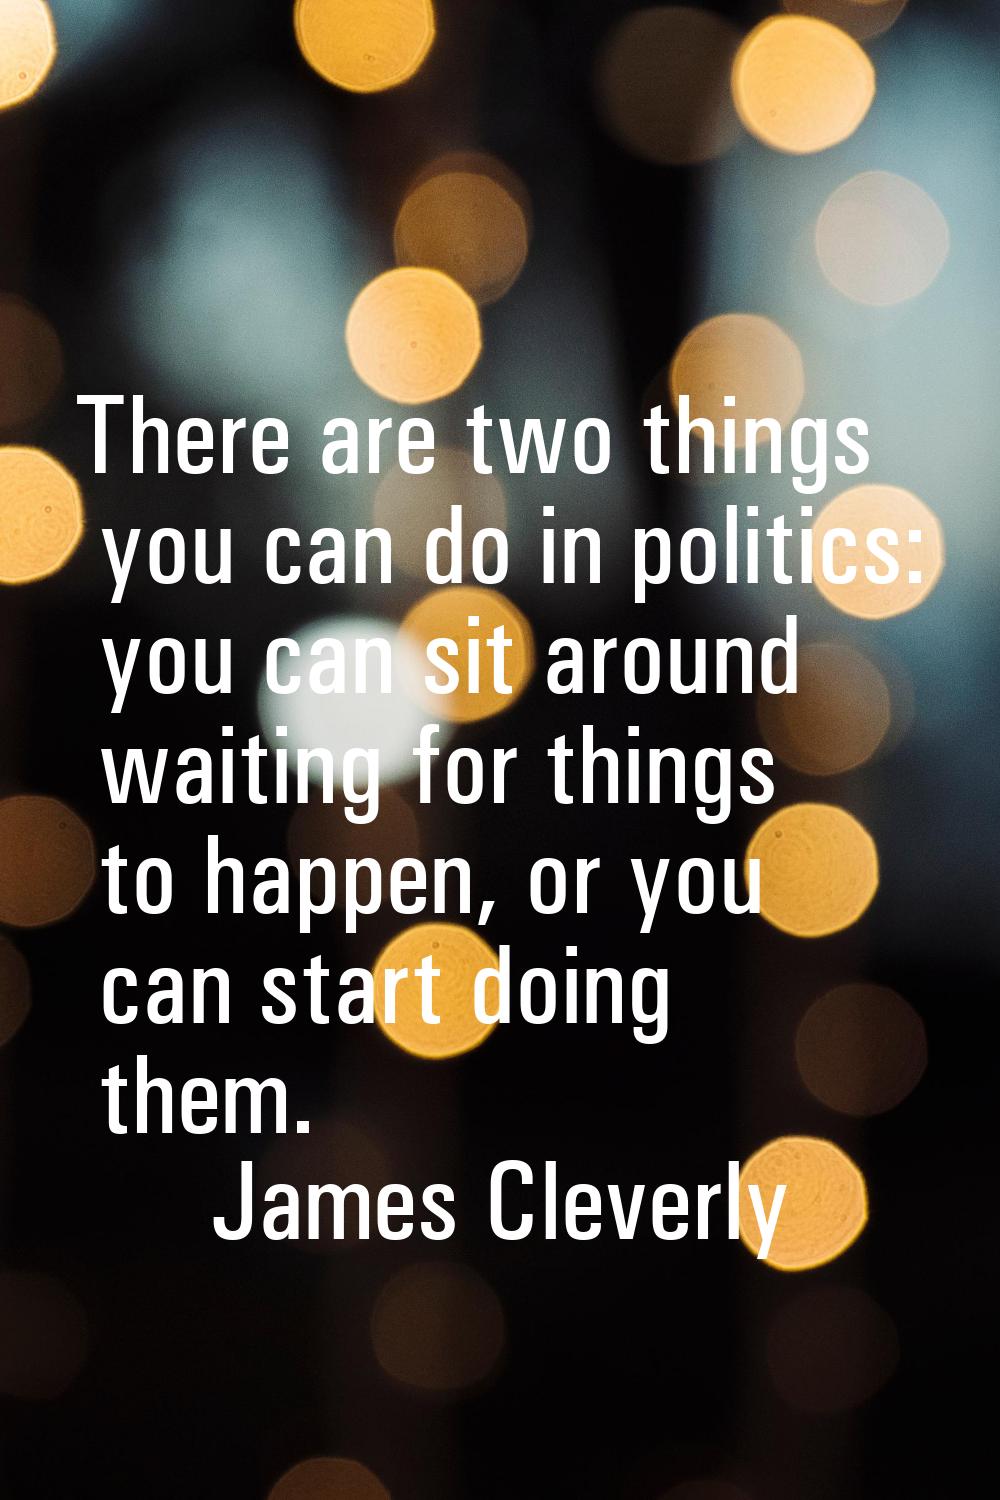 There are two things you can do in politics: you can sit around waiting for things to happen, or yo